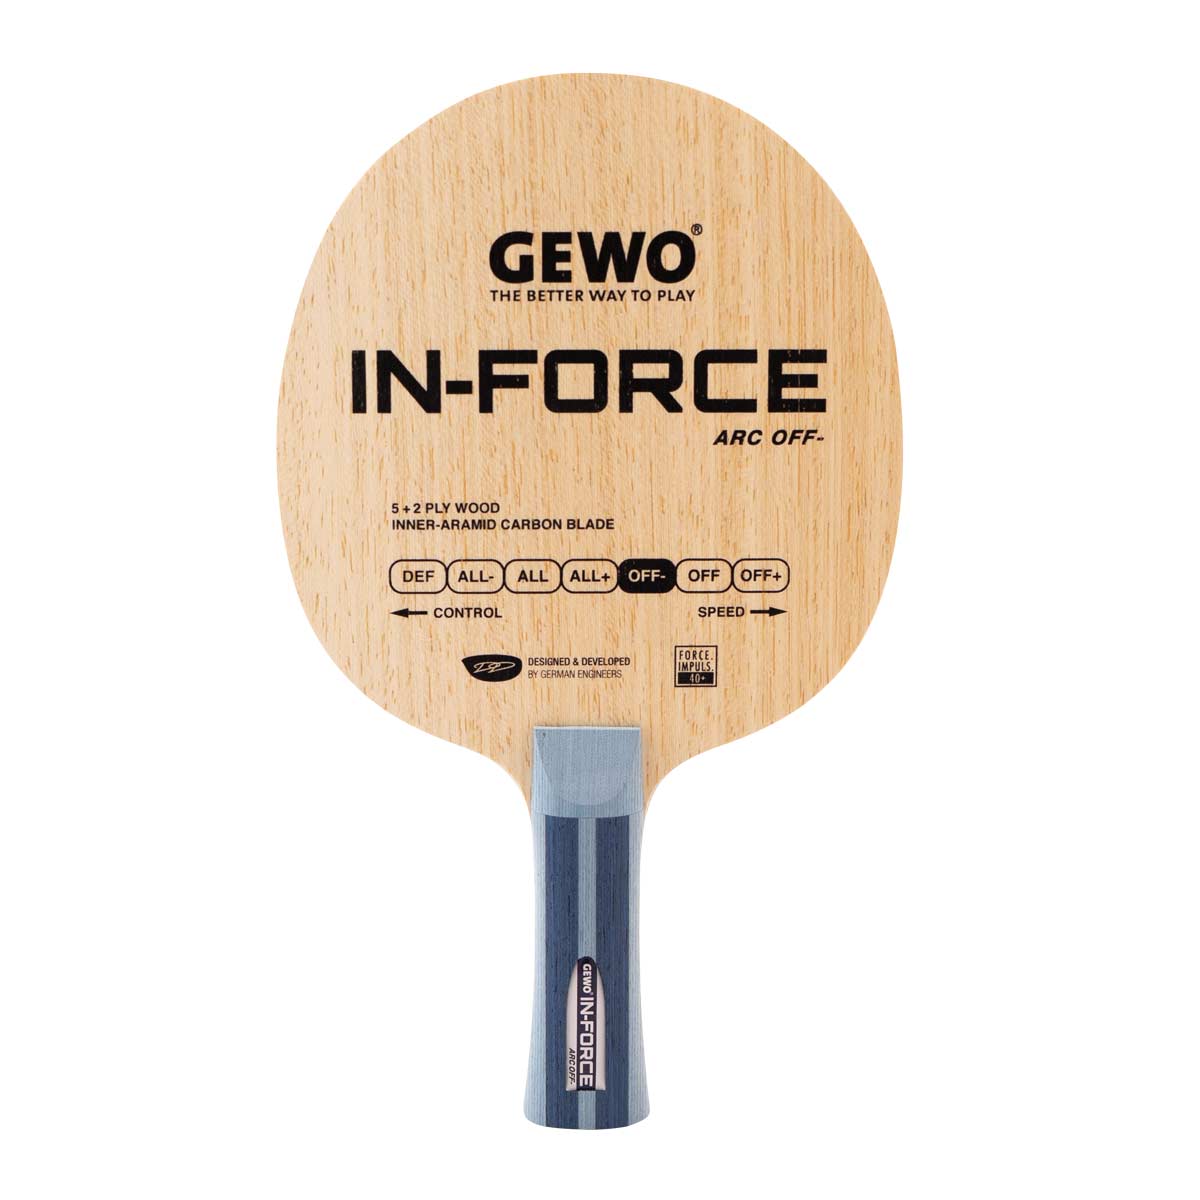 GEWO Blade In-Force ARC OFF-  flared